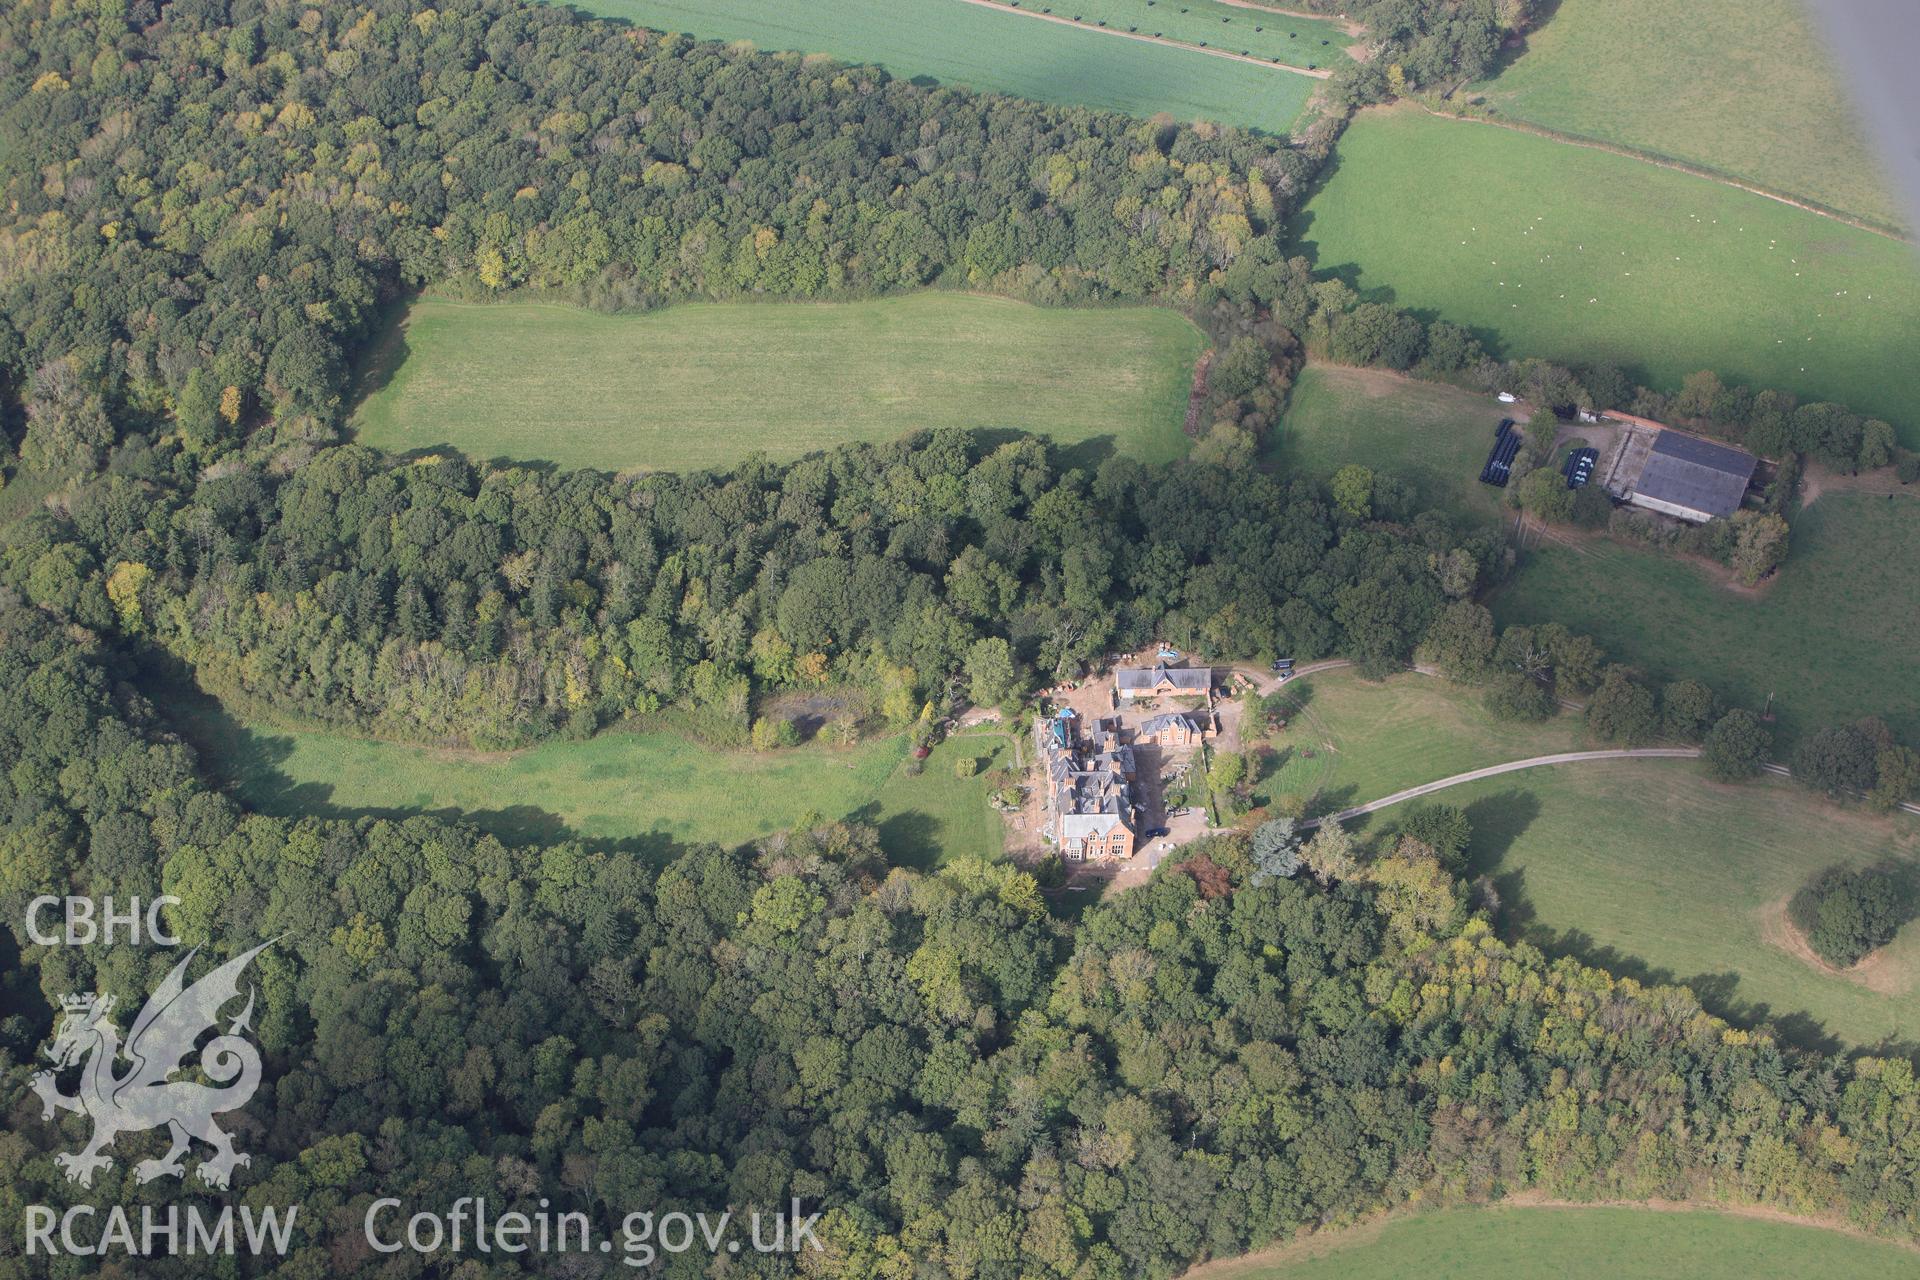 RCAHMW colour oblique photograph of Nantlys, Nantllys. Taken by Toby Driver on 04/10/2011.